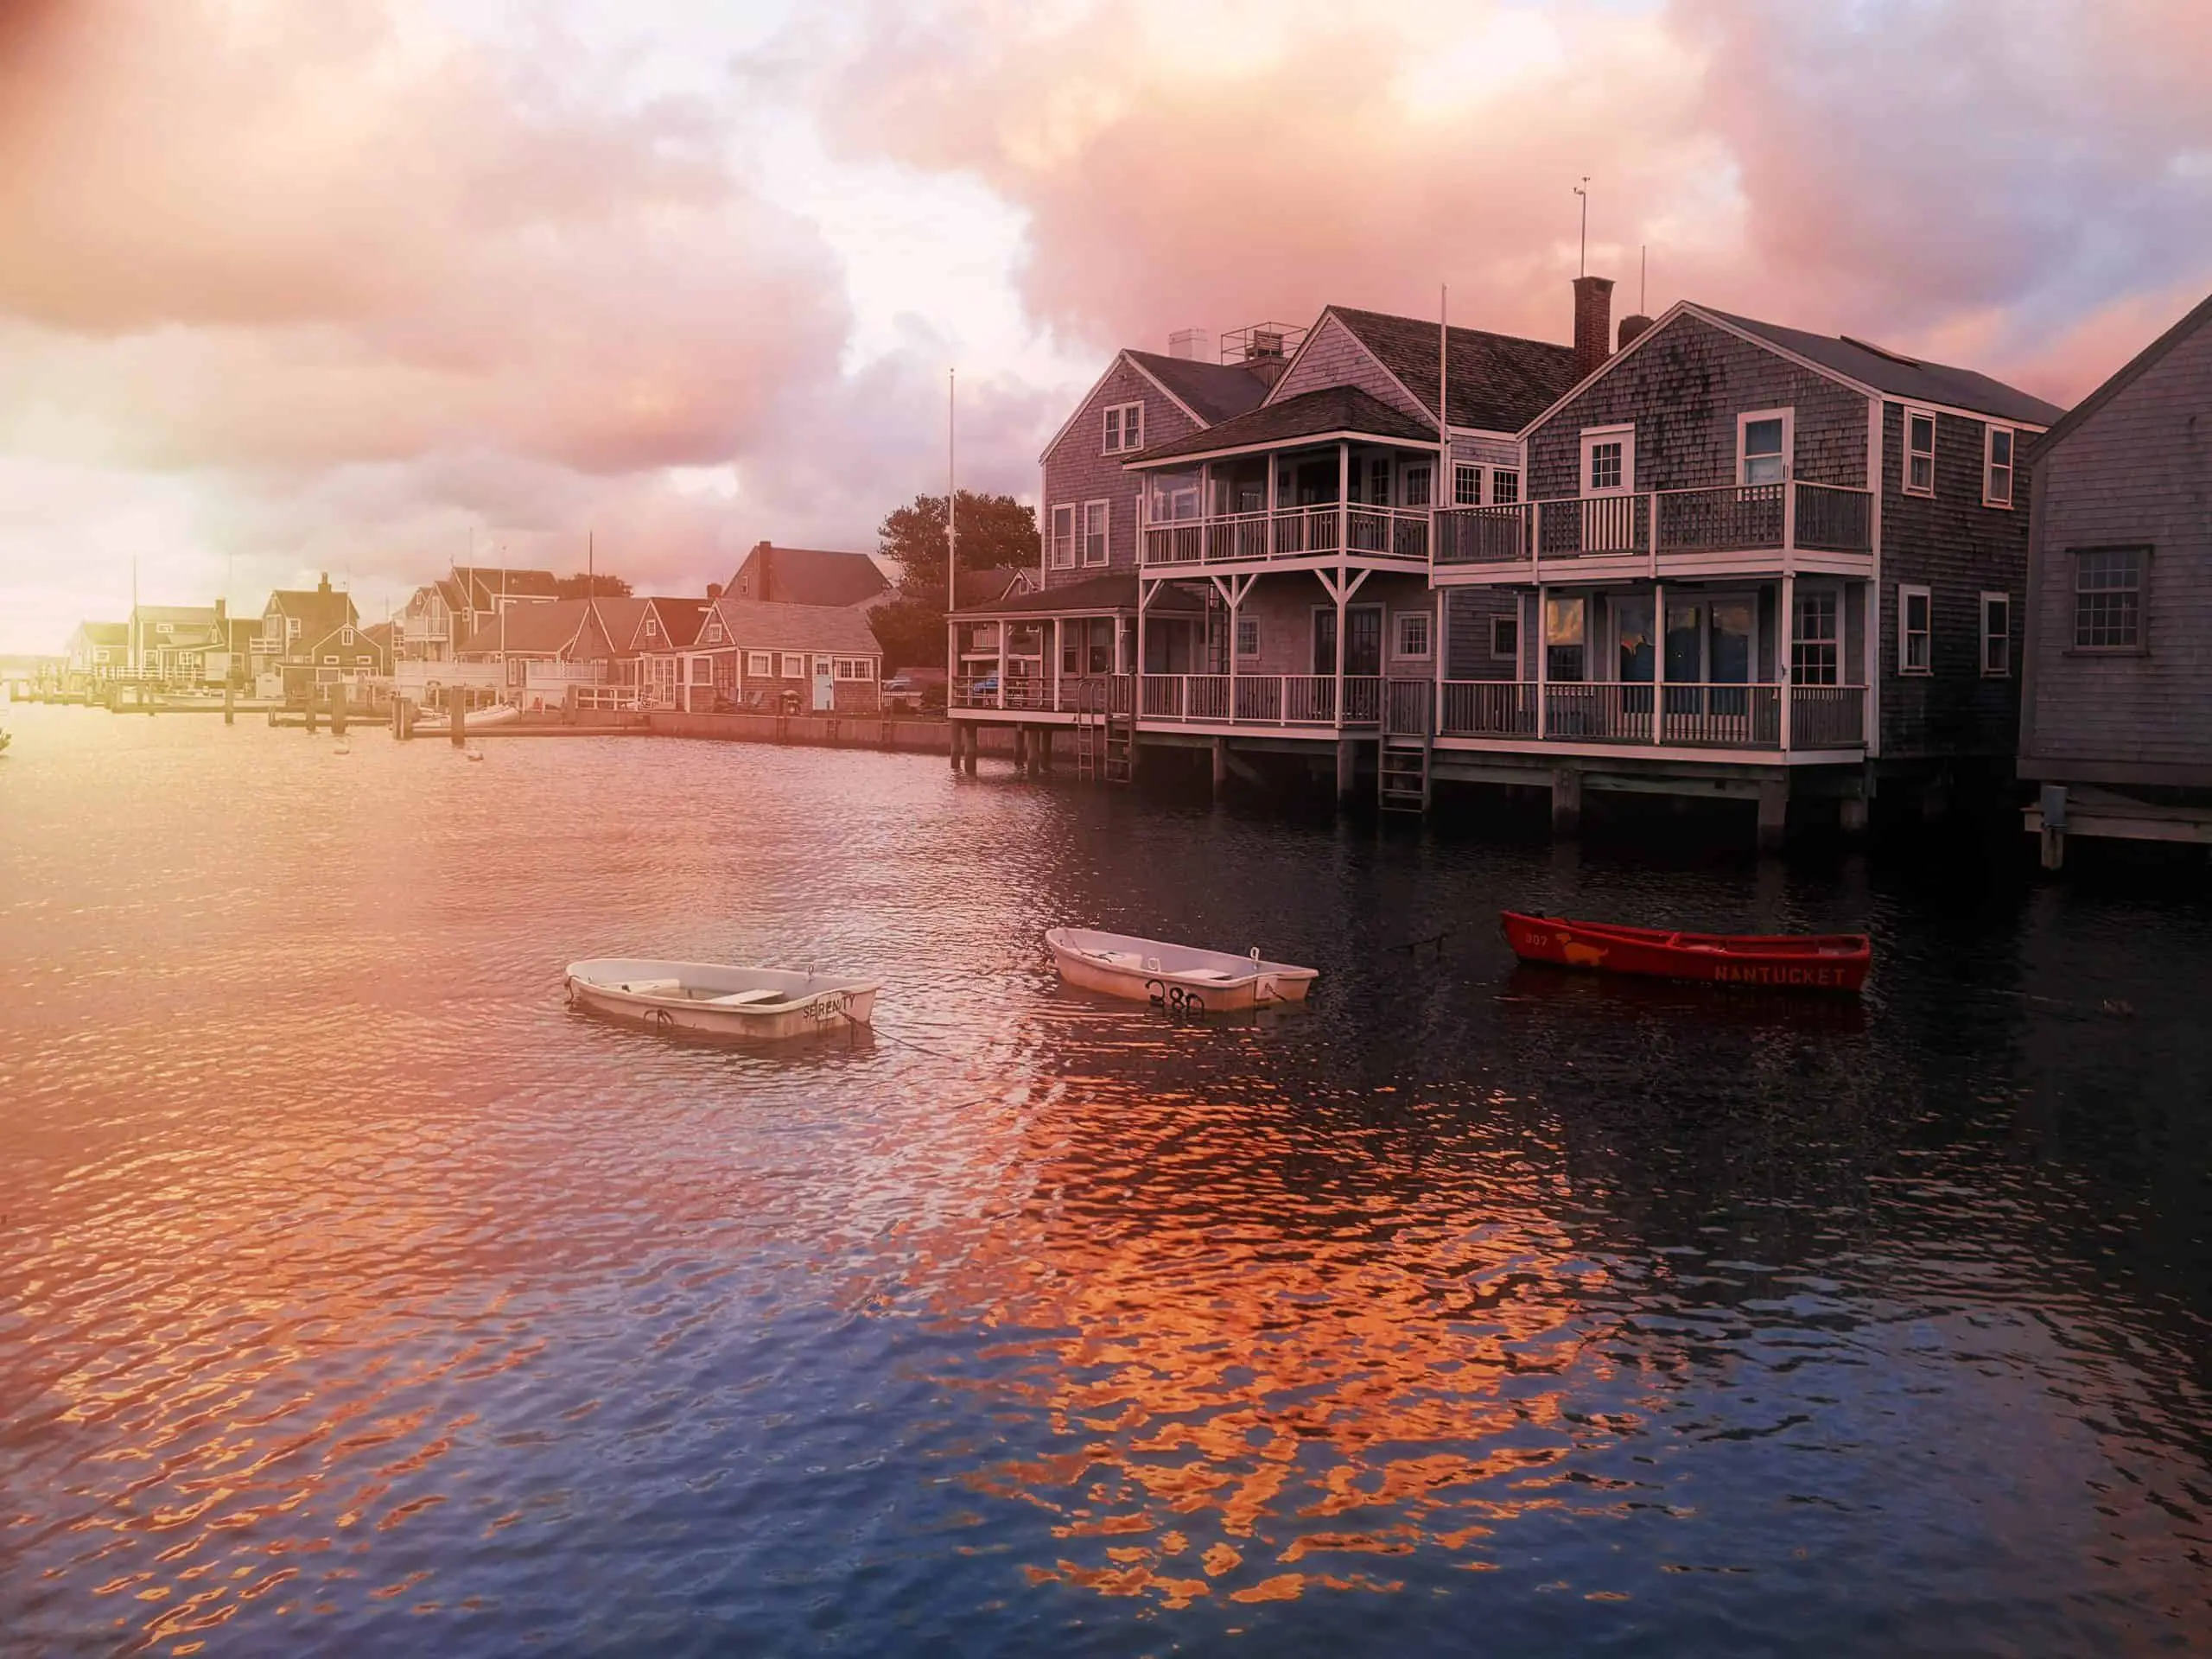 Harbour House in dramatic Stormy Summer Sunset in Nantucket Island